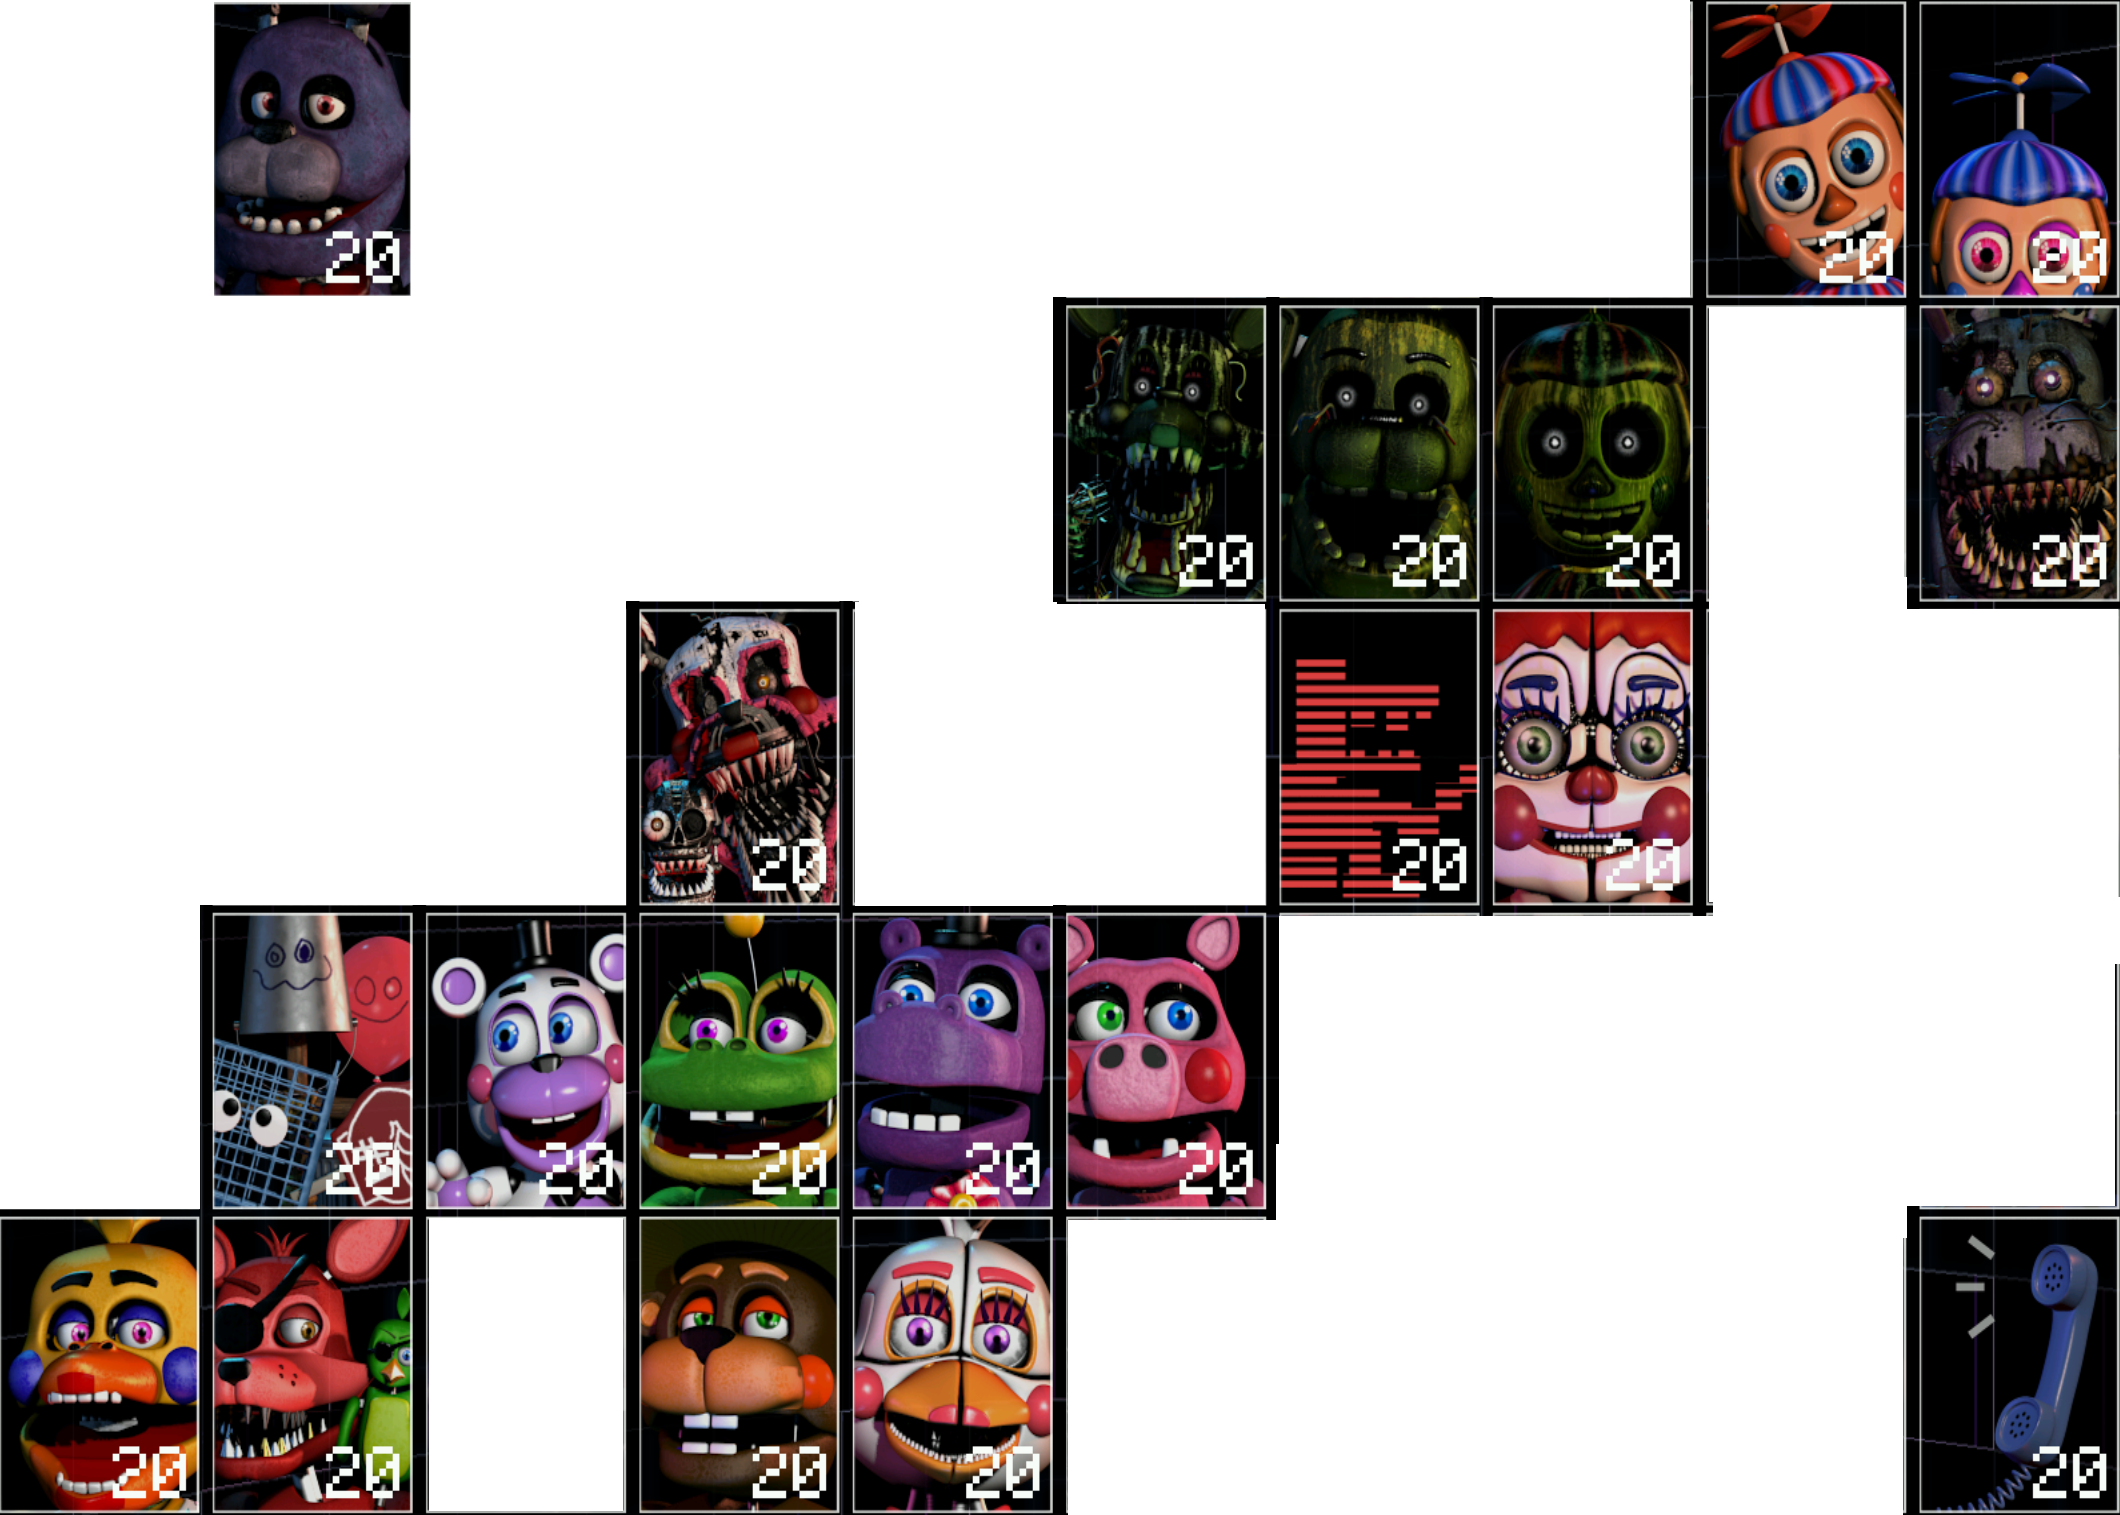 Ultimate Custom Night - How to get 4000 points for free - Guide to 4000 points for free without dying - B52C03F